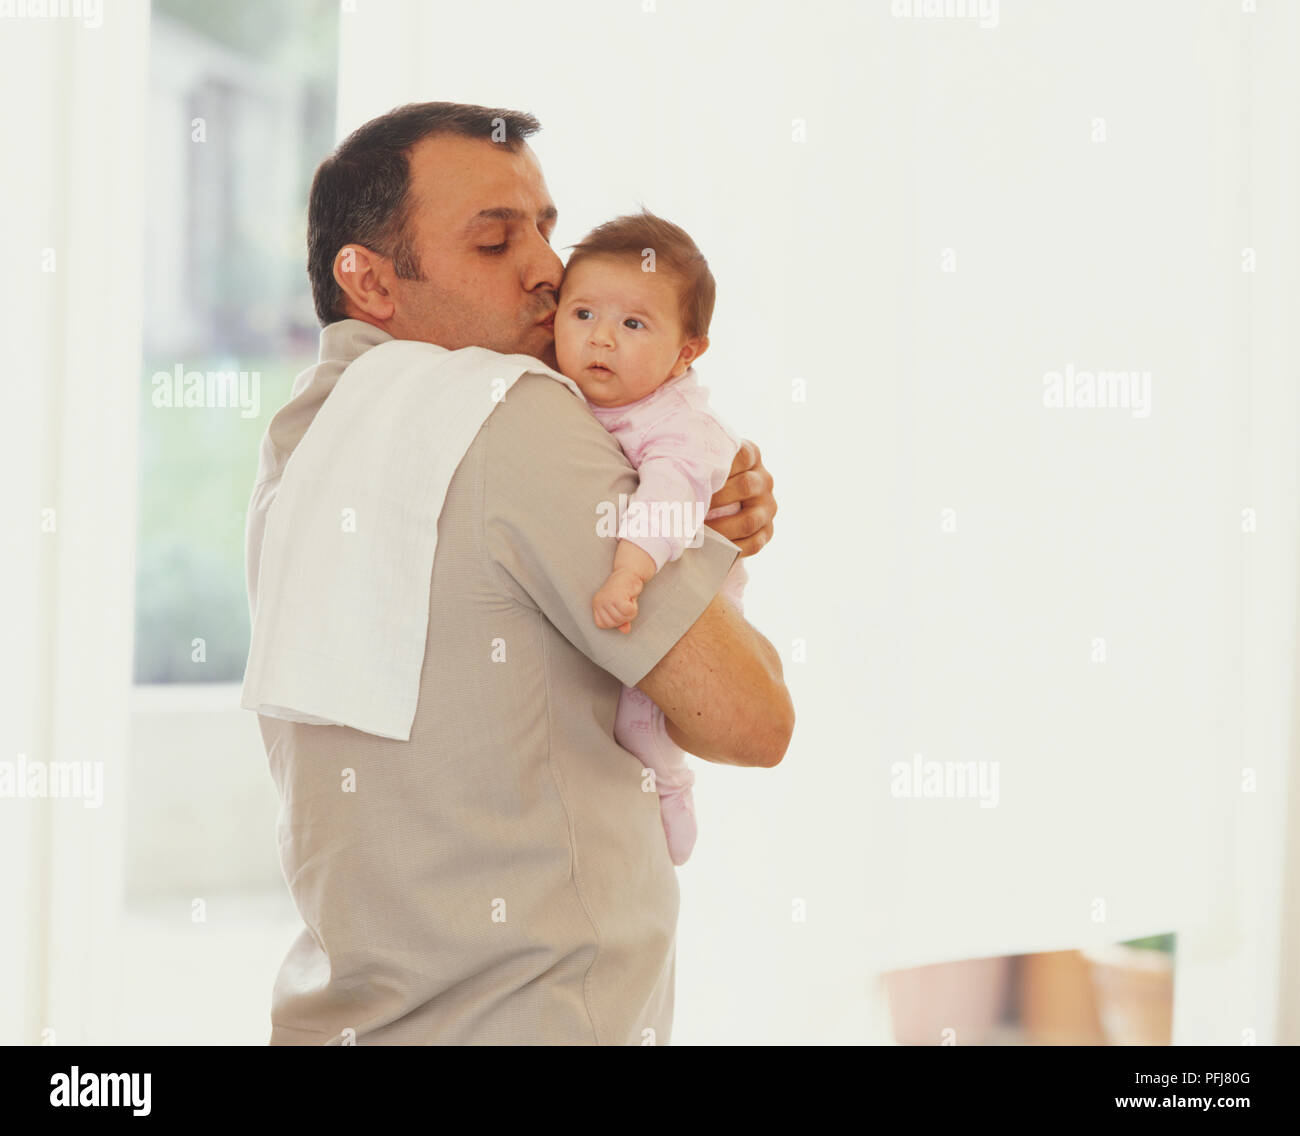 Baby looking over the shoulder of man who is holding her, and planting a kiss on her cheek Stock Photo